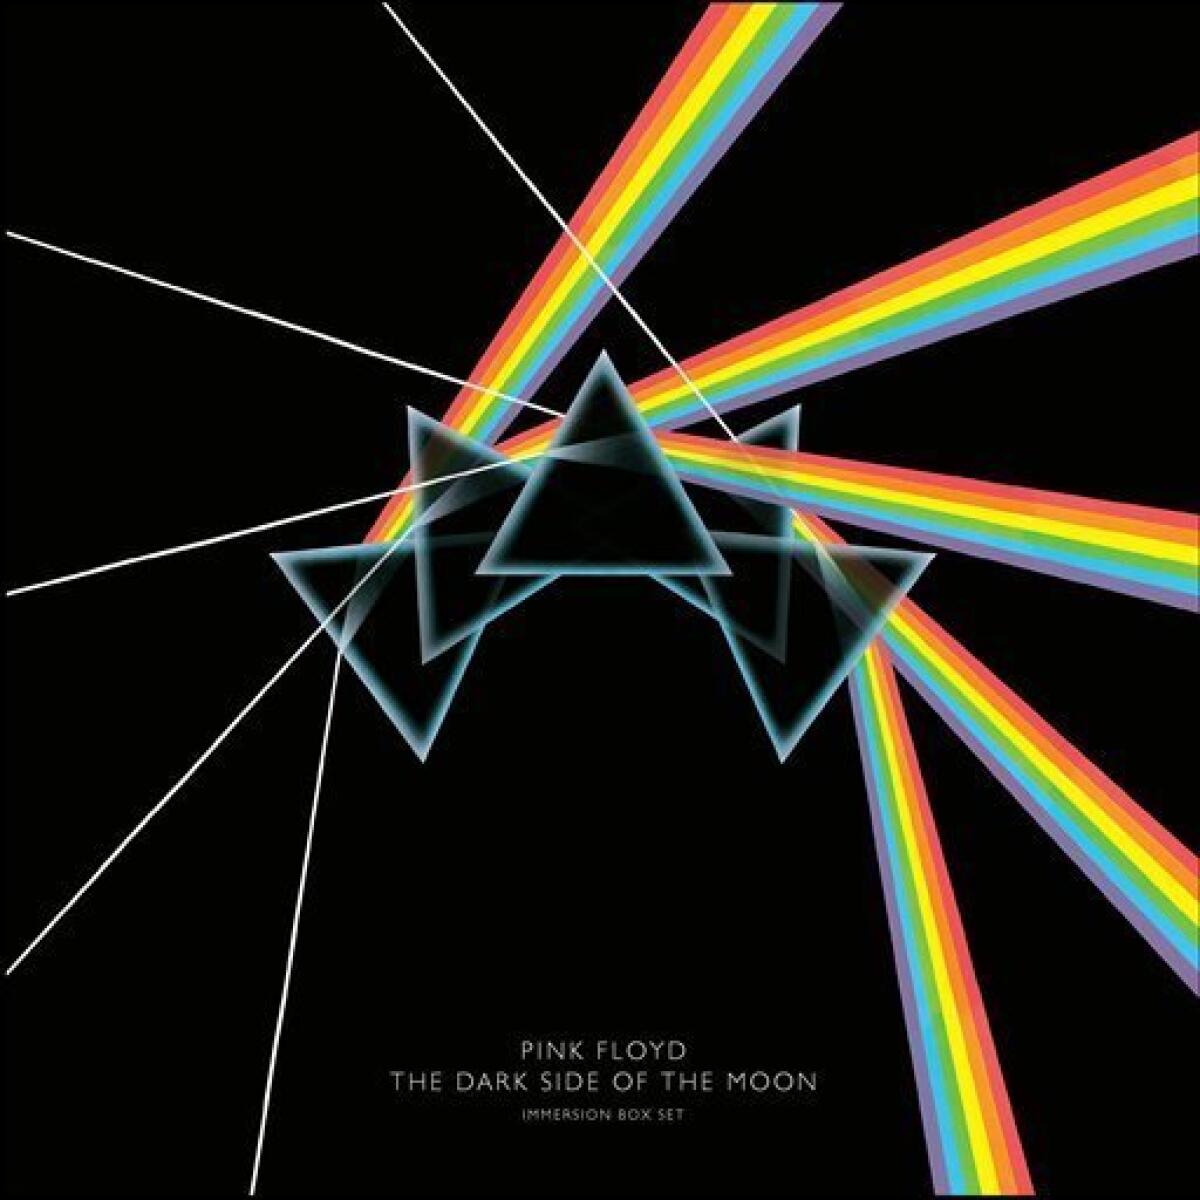 Pink Floyd's 'Dark Side of the Moon' turns 40 - The San Diego